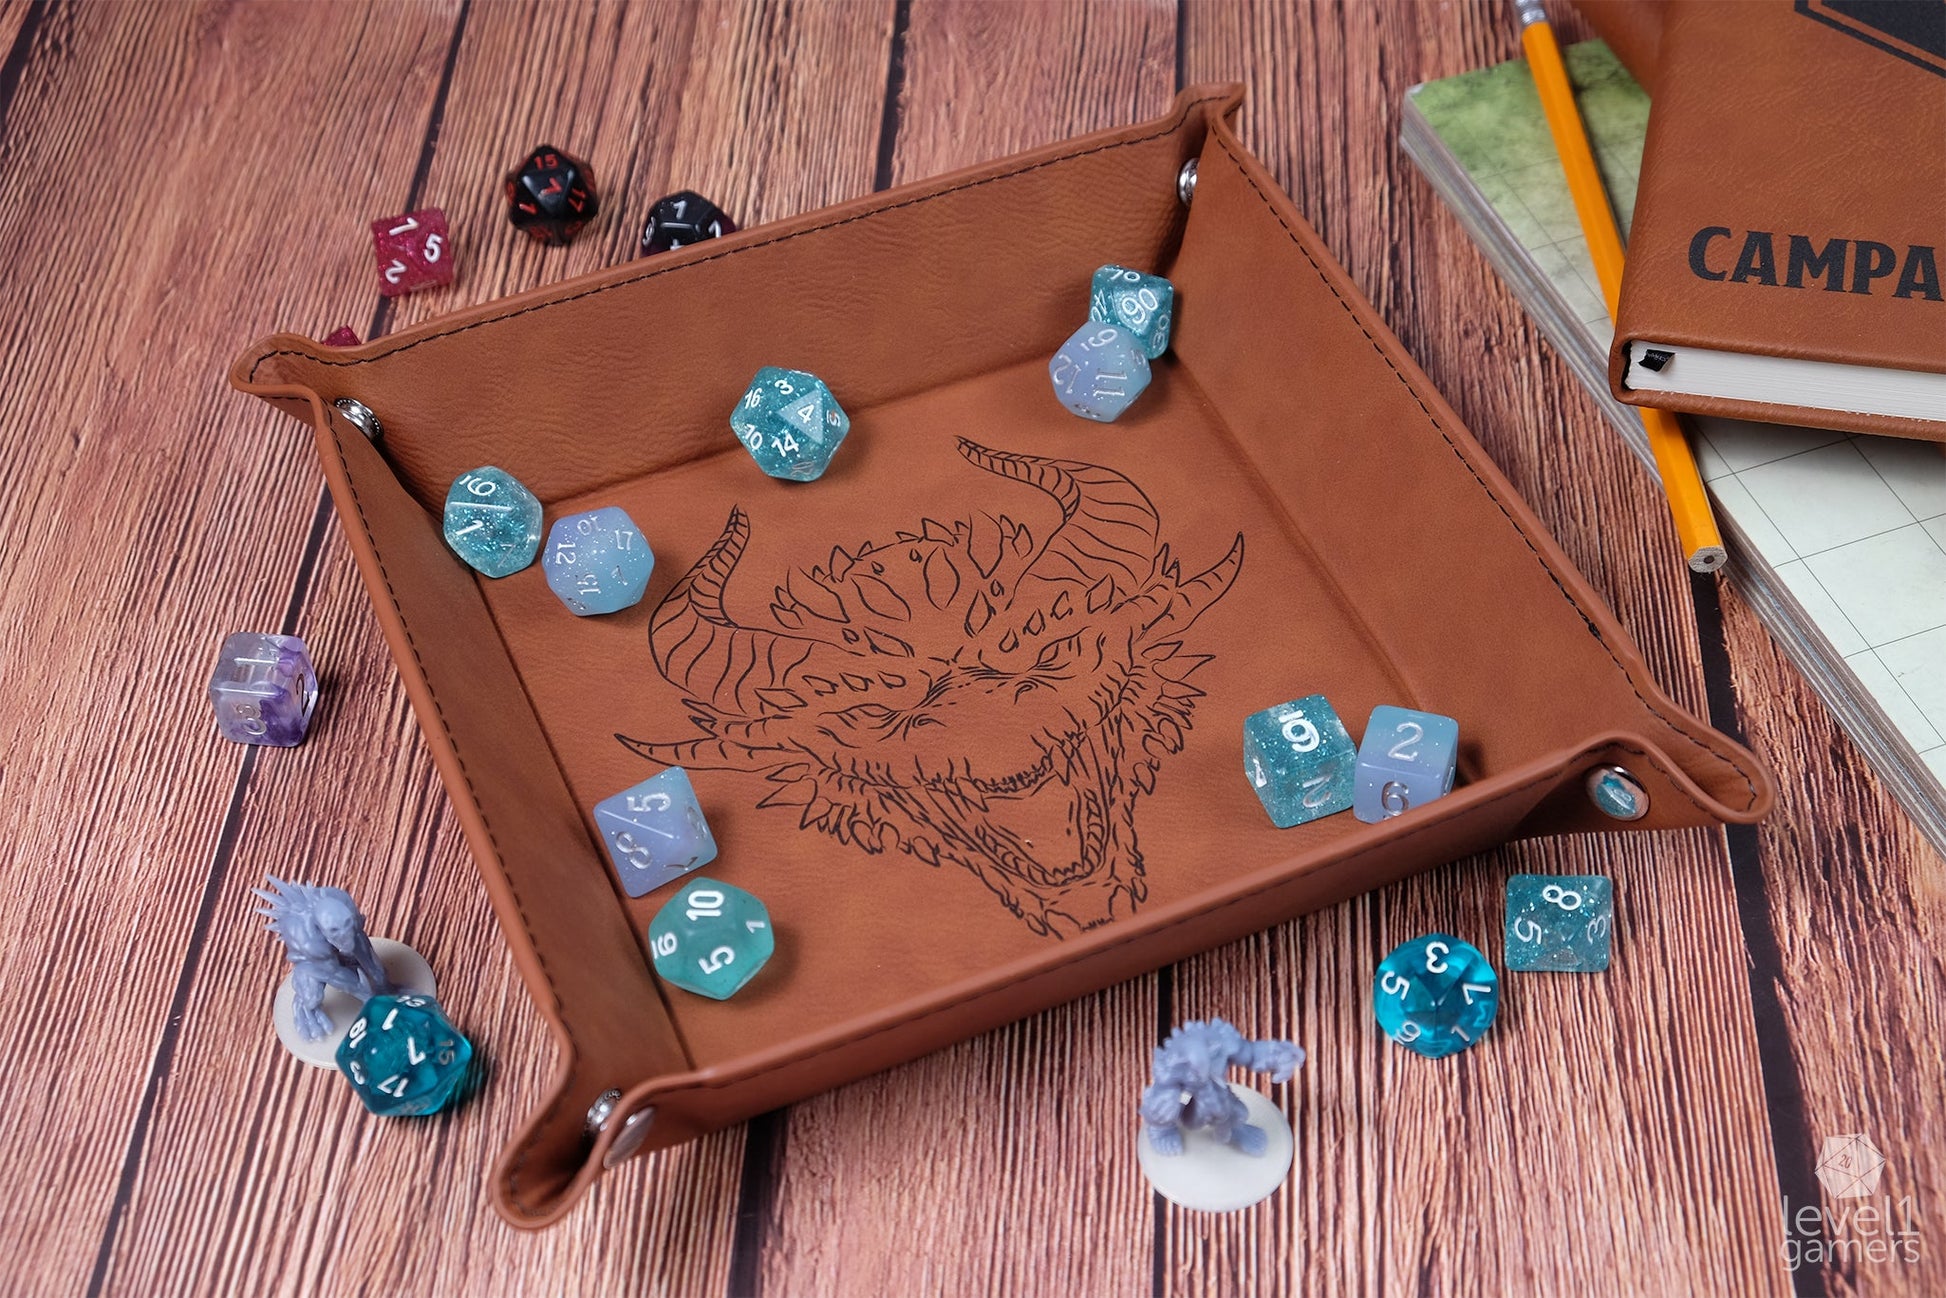 Dragon Dice Tray Dice Trays Level 1 Gamers   